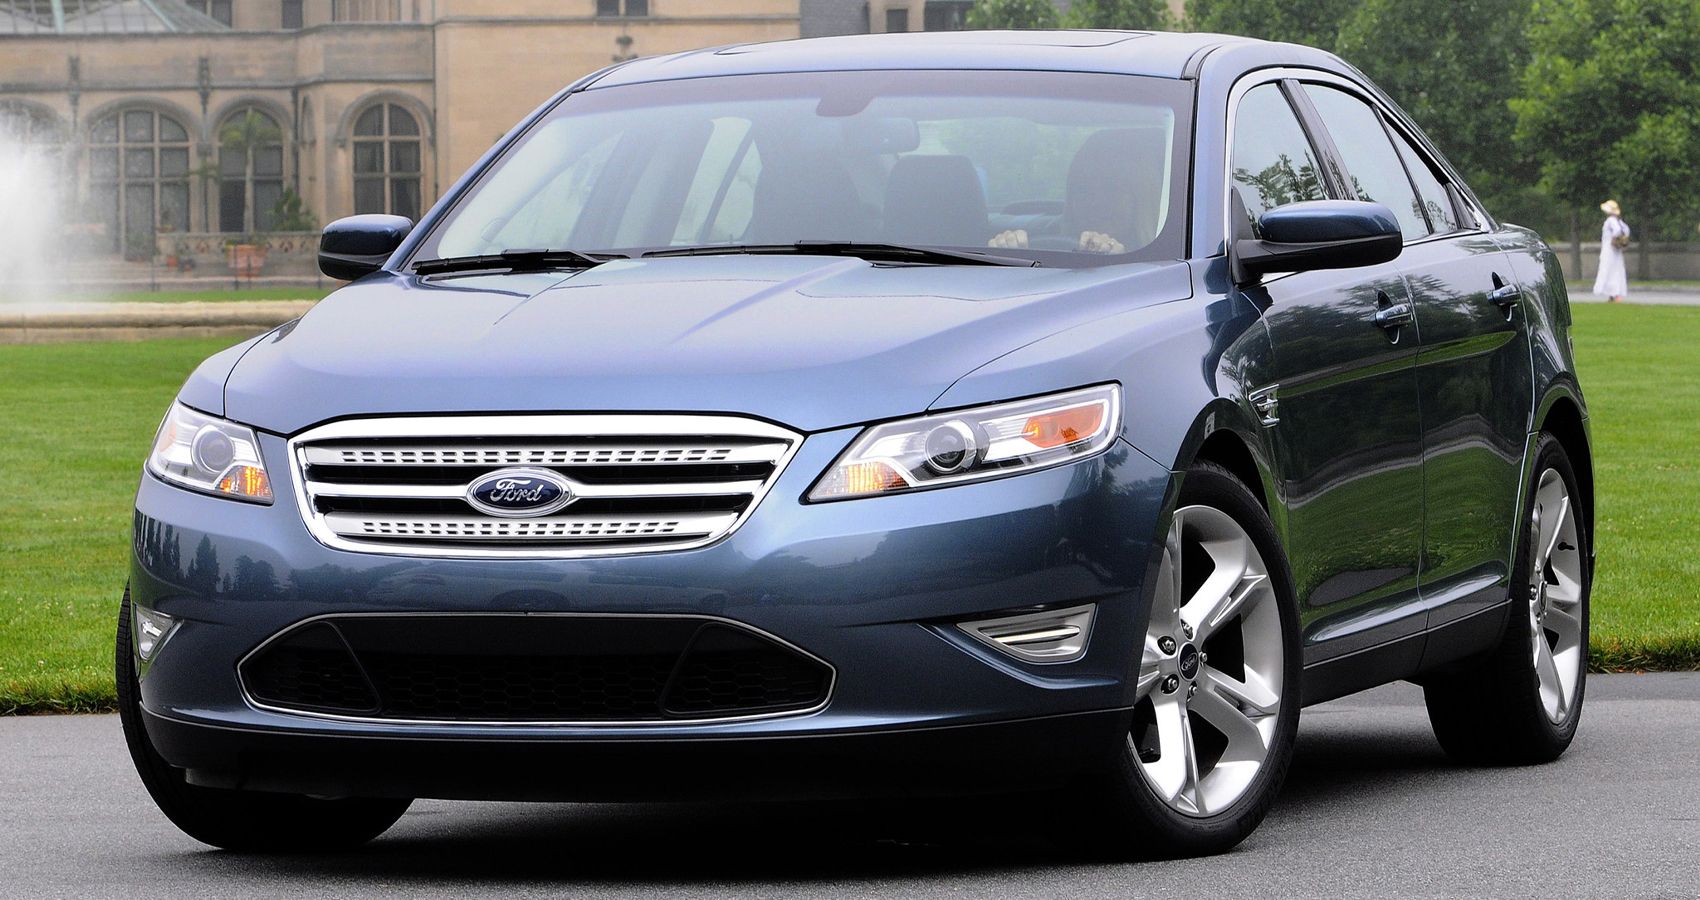 The front of the Taurus SHO in bluish gray